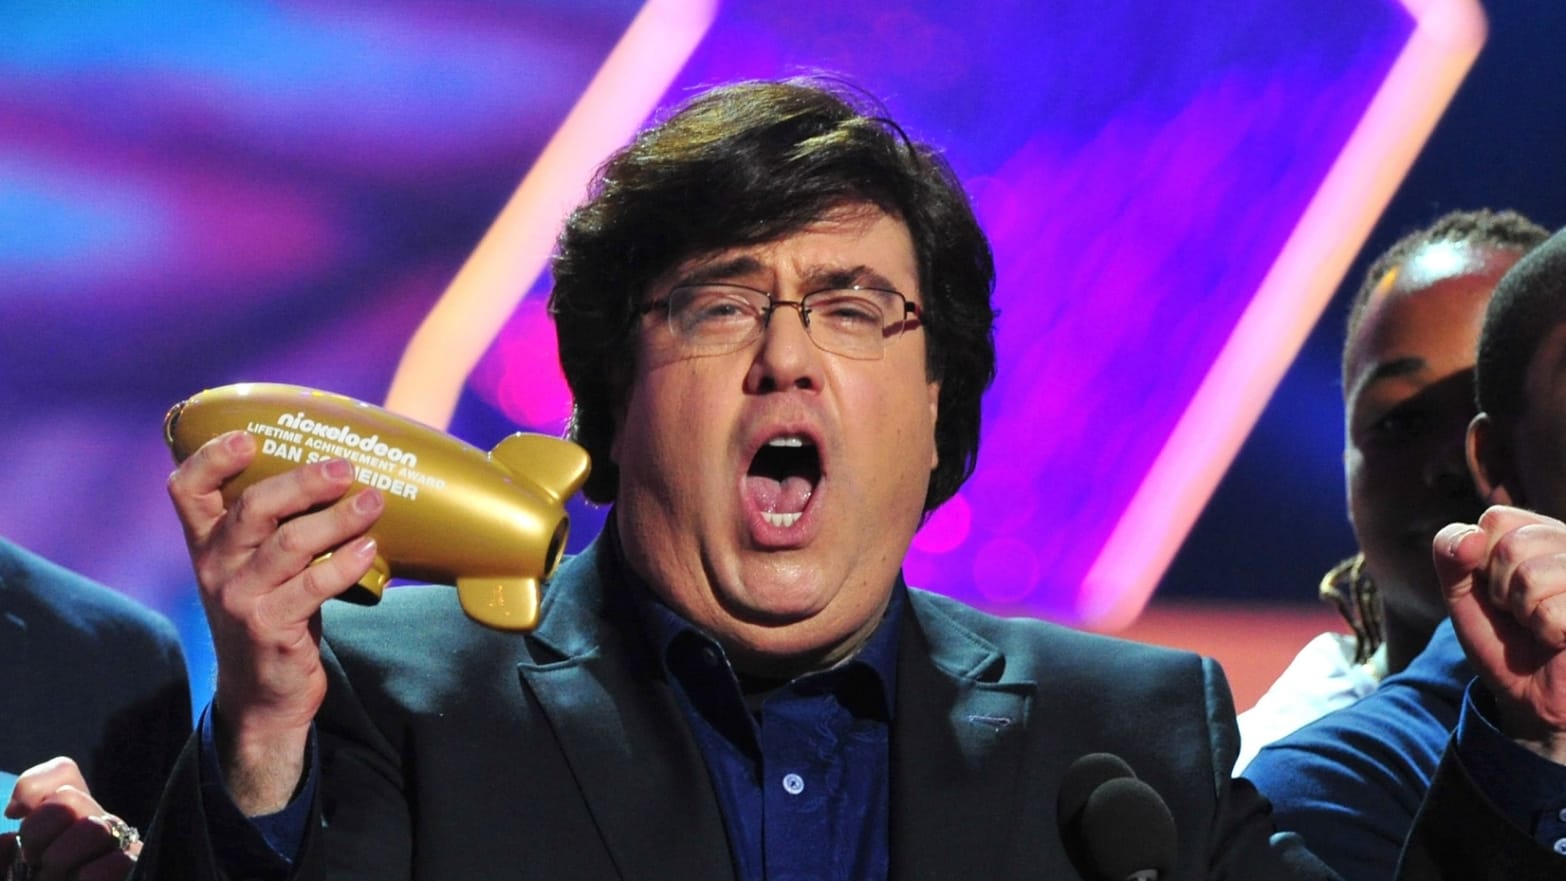 Dan Schneider at the 27th Annual Kids' Choice Awards in 2014.